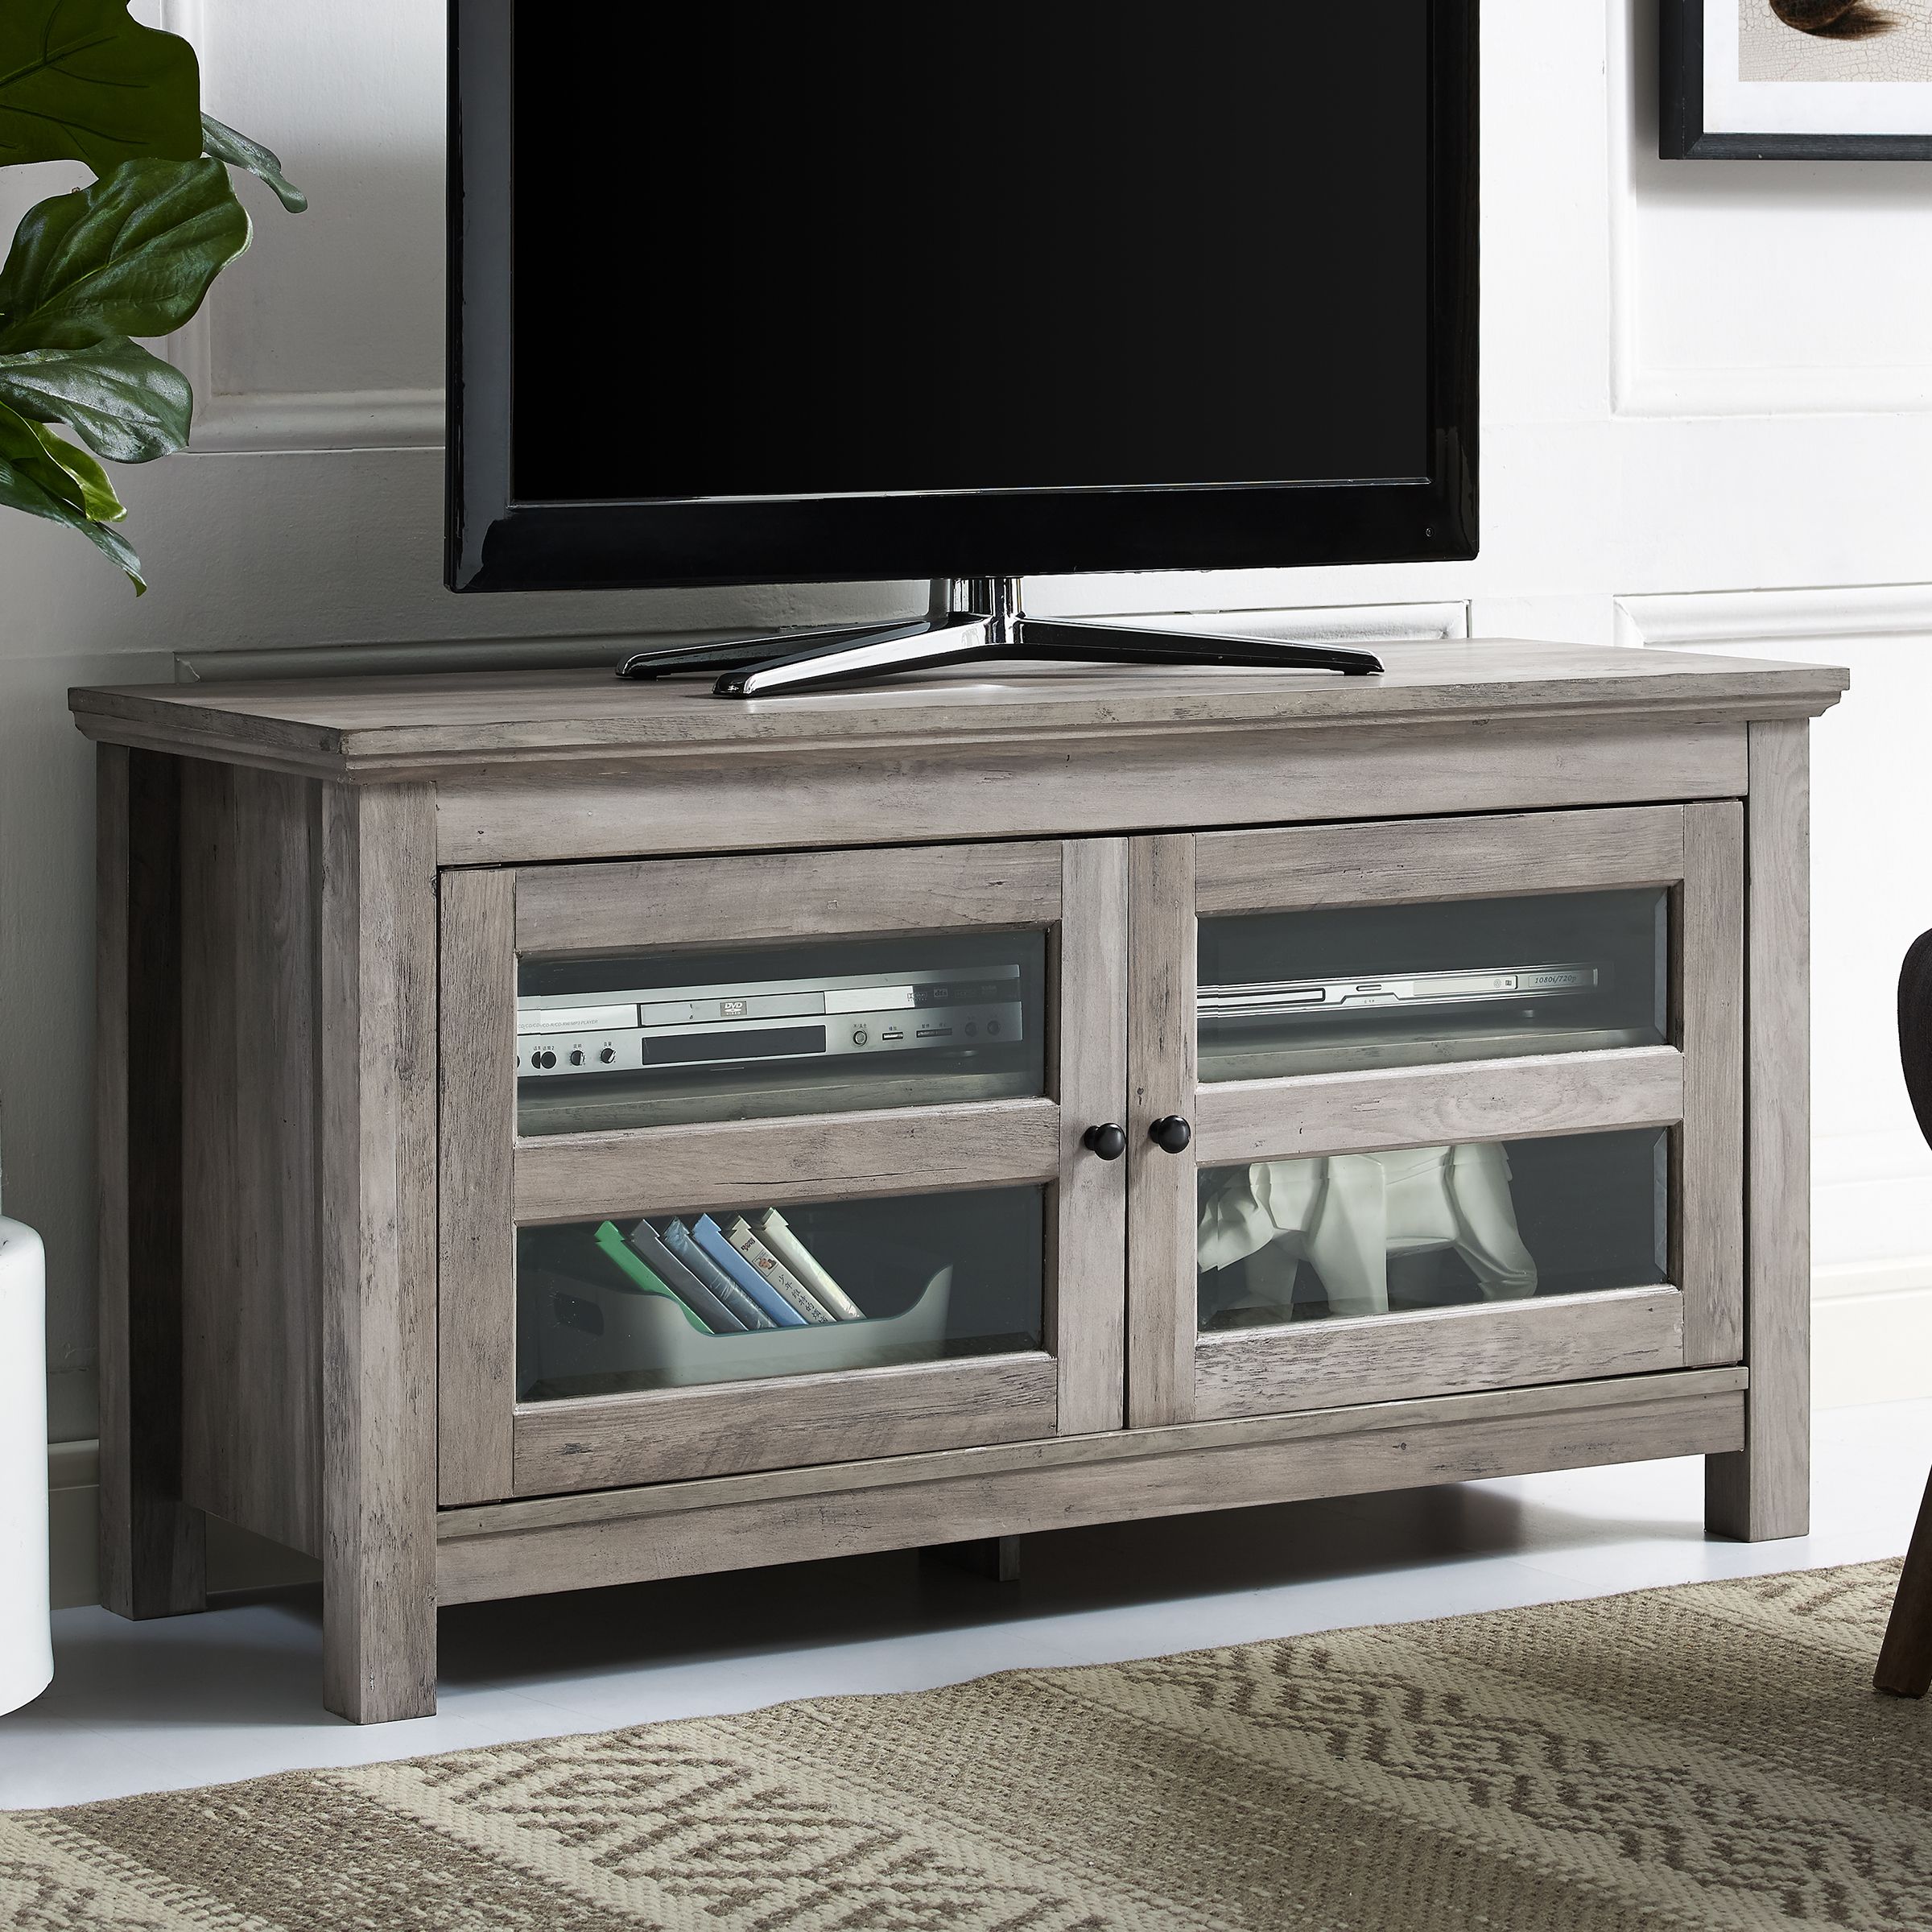 Manor Park 44" Wood Tv Media Stand Storage Console – Grey In Tv Cabinets With Storage (View 4 of 15)